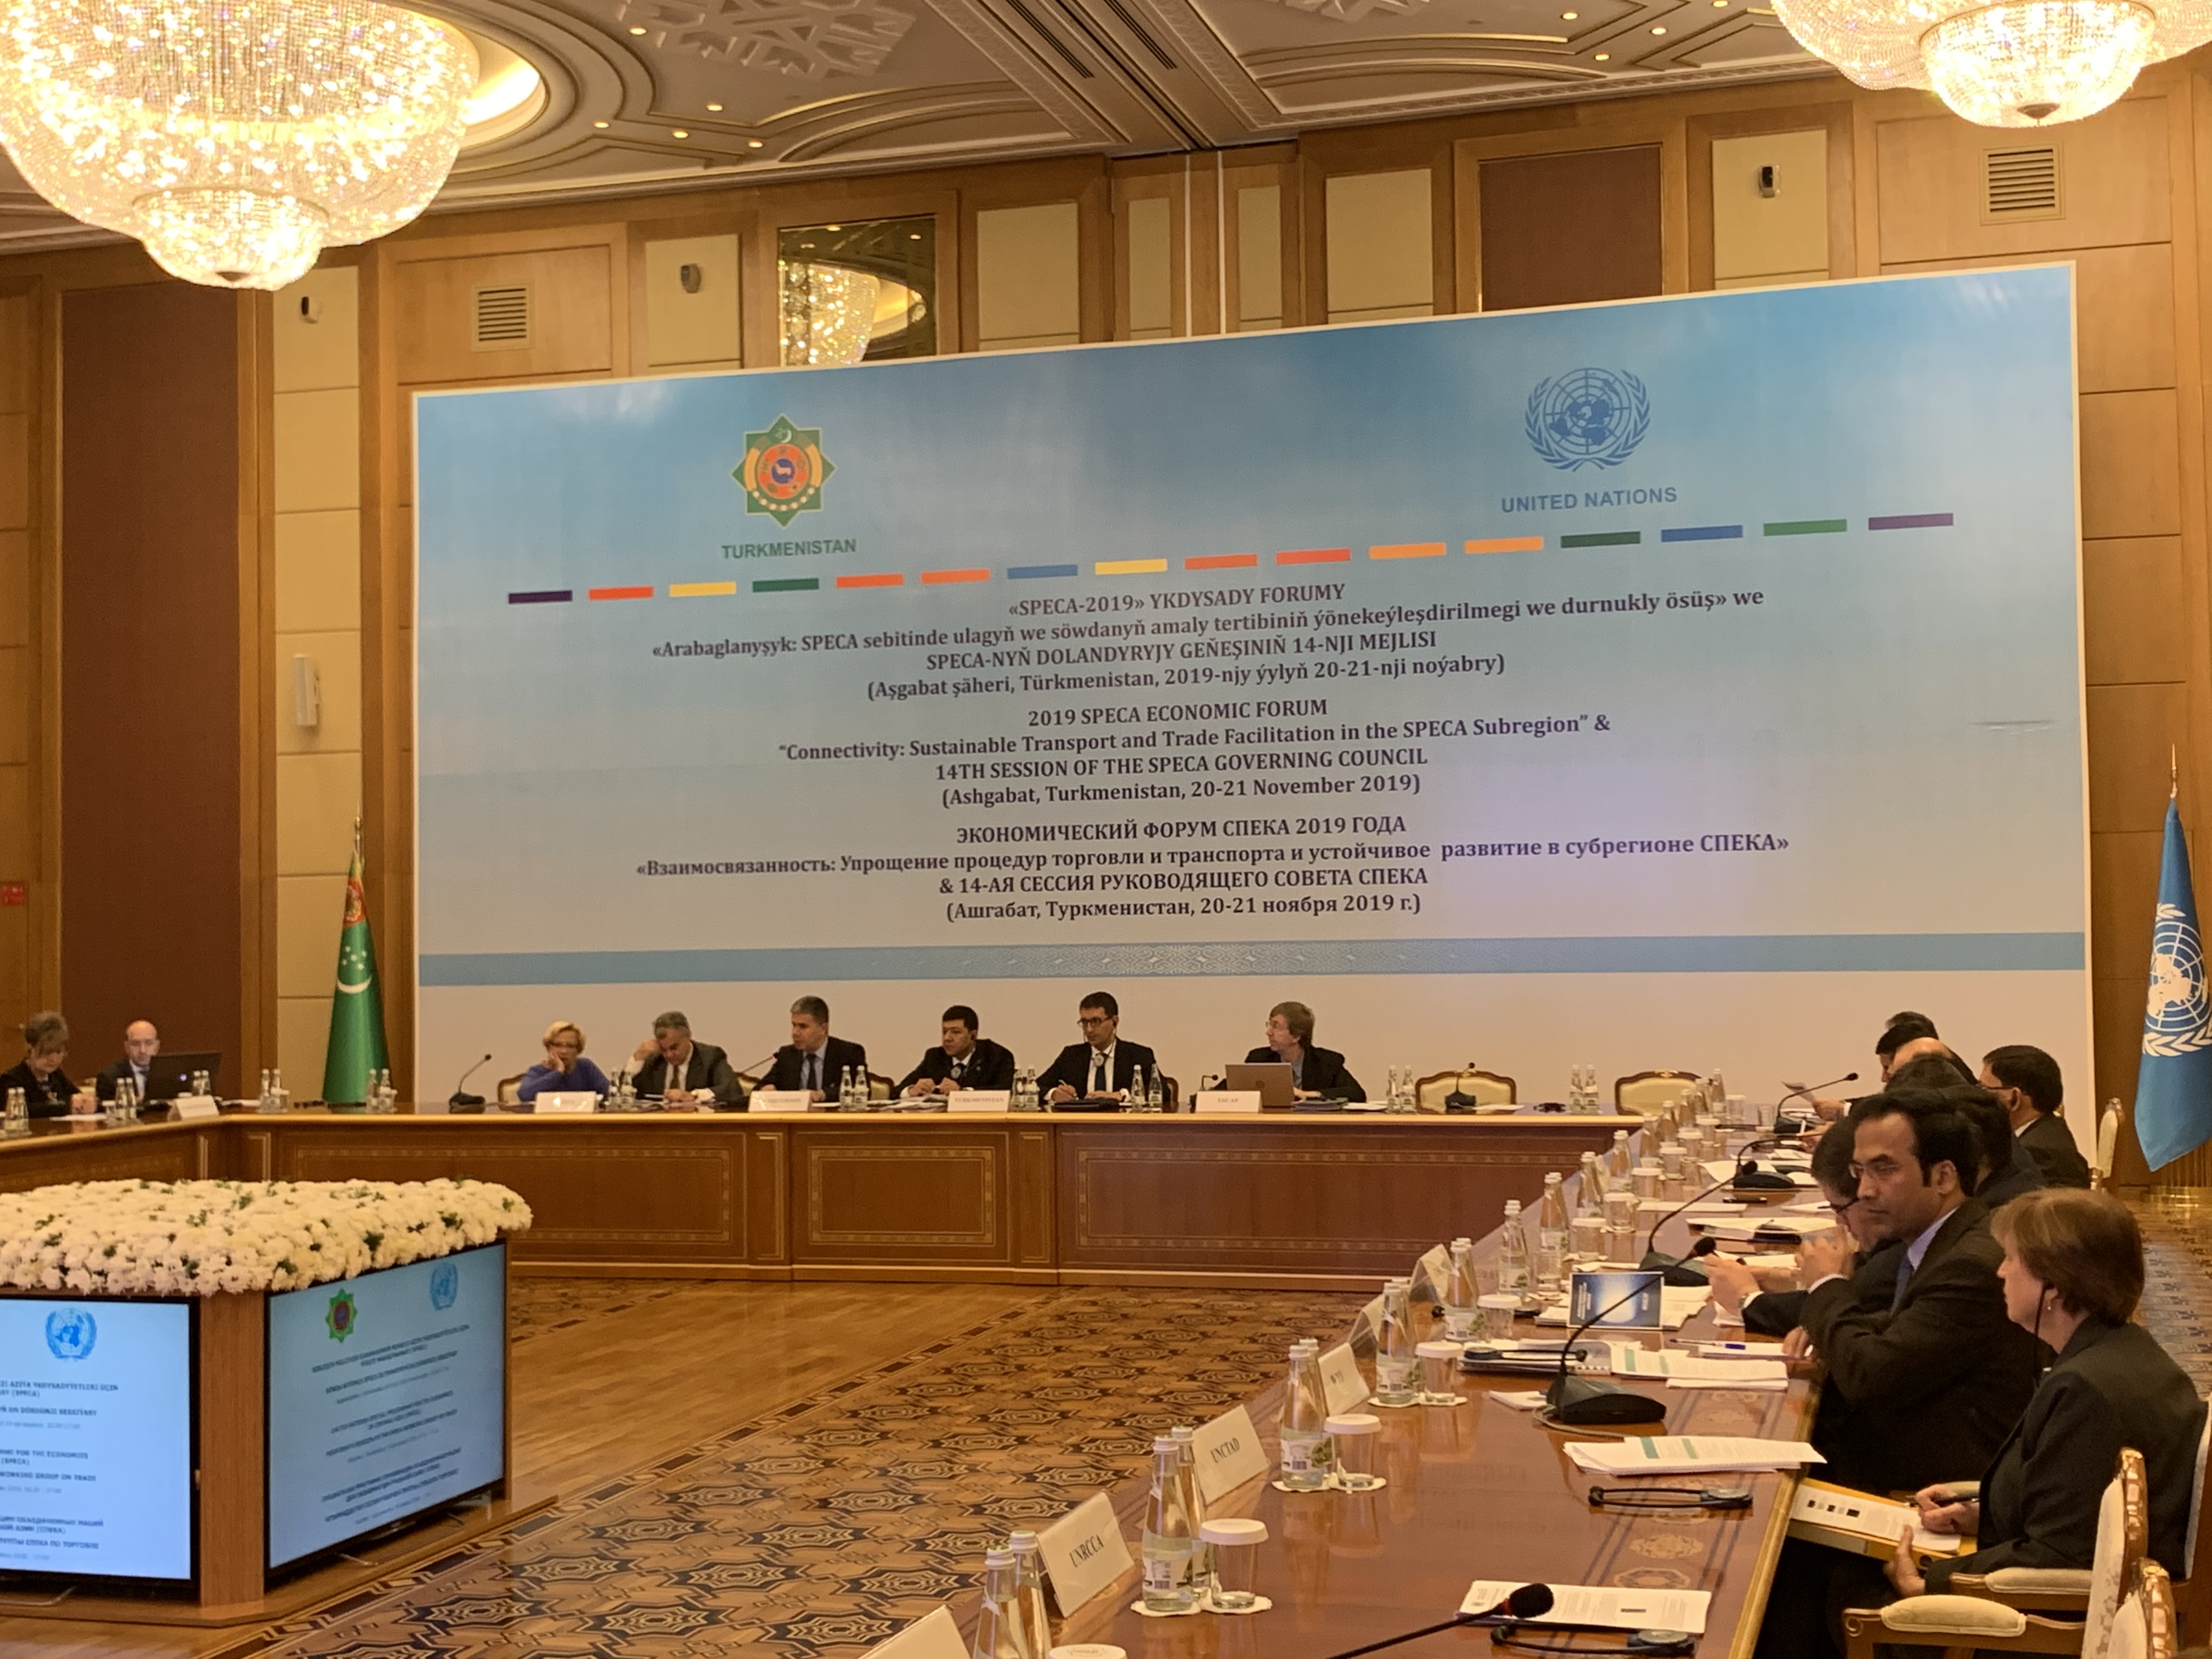 The 14th meeting of the Working Group on Trade of the UN Special Program for the Economies of Central Asia (SPECA) has been conducted under the leadership of the Republic of Tajikistan